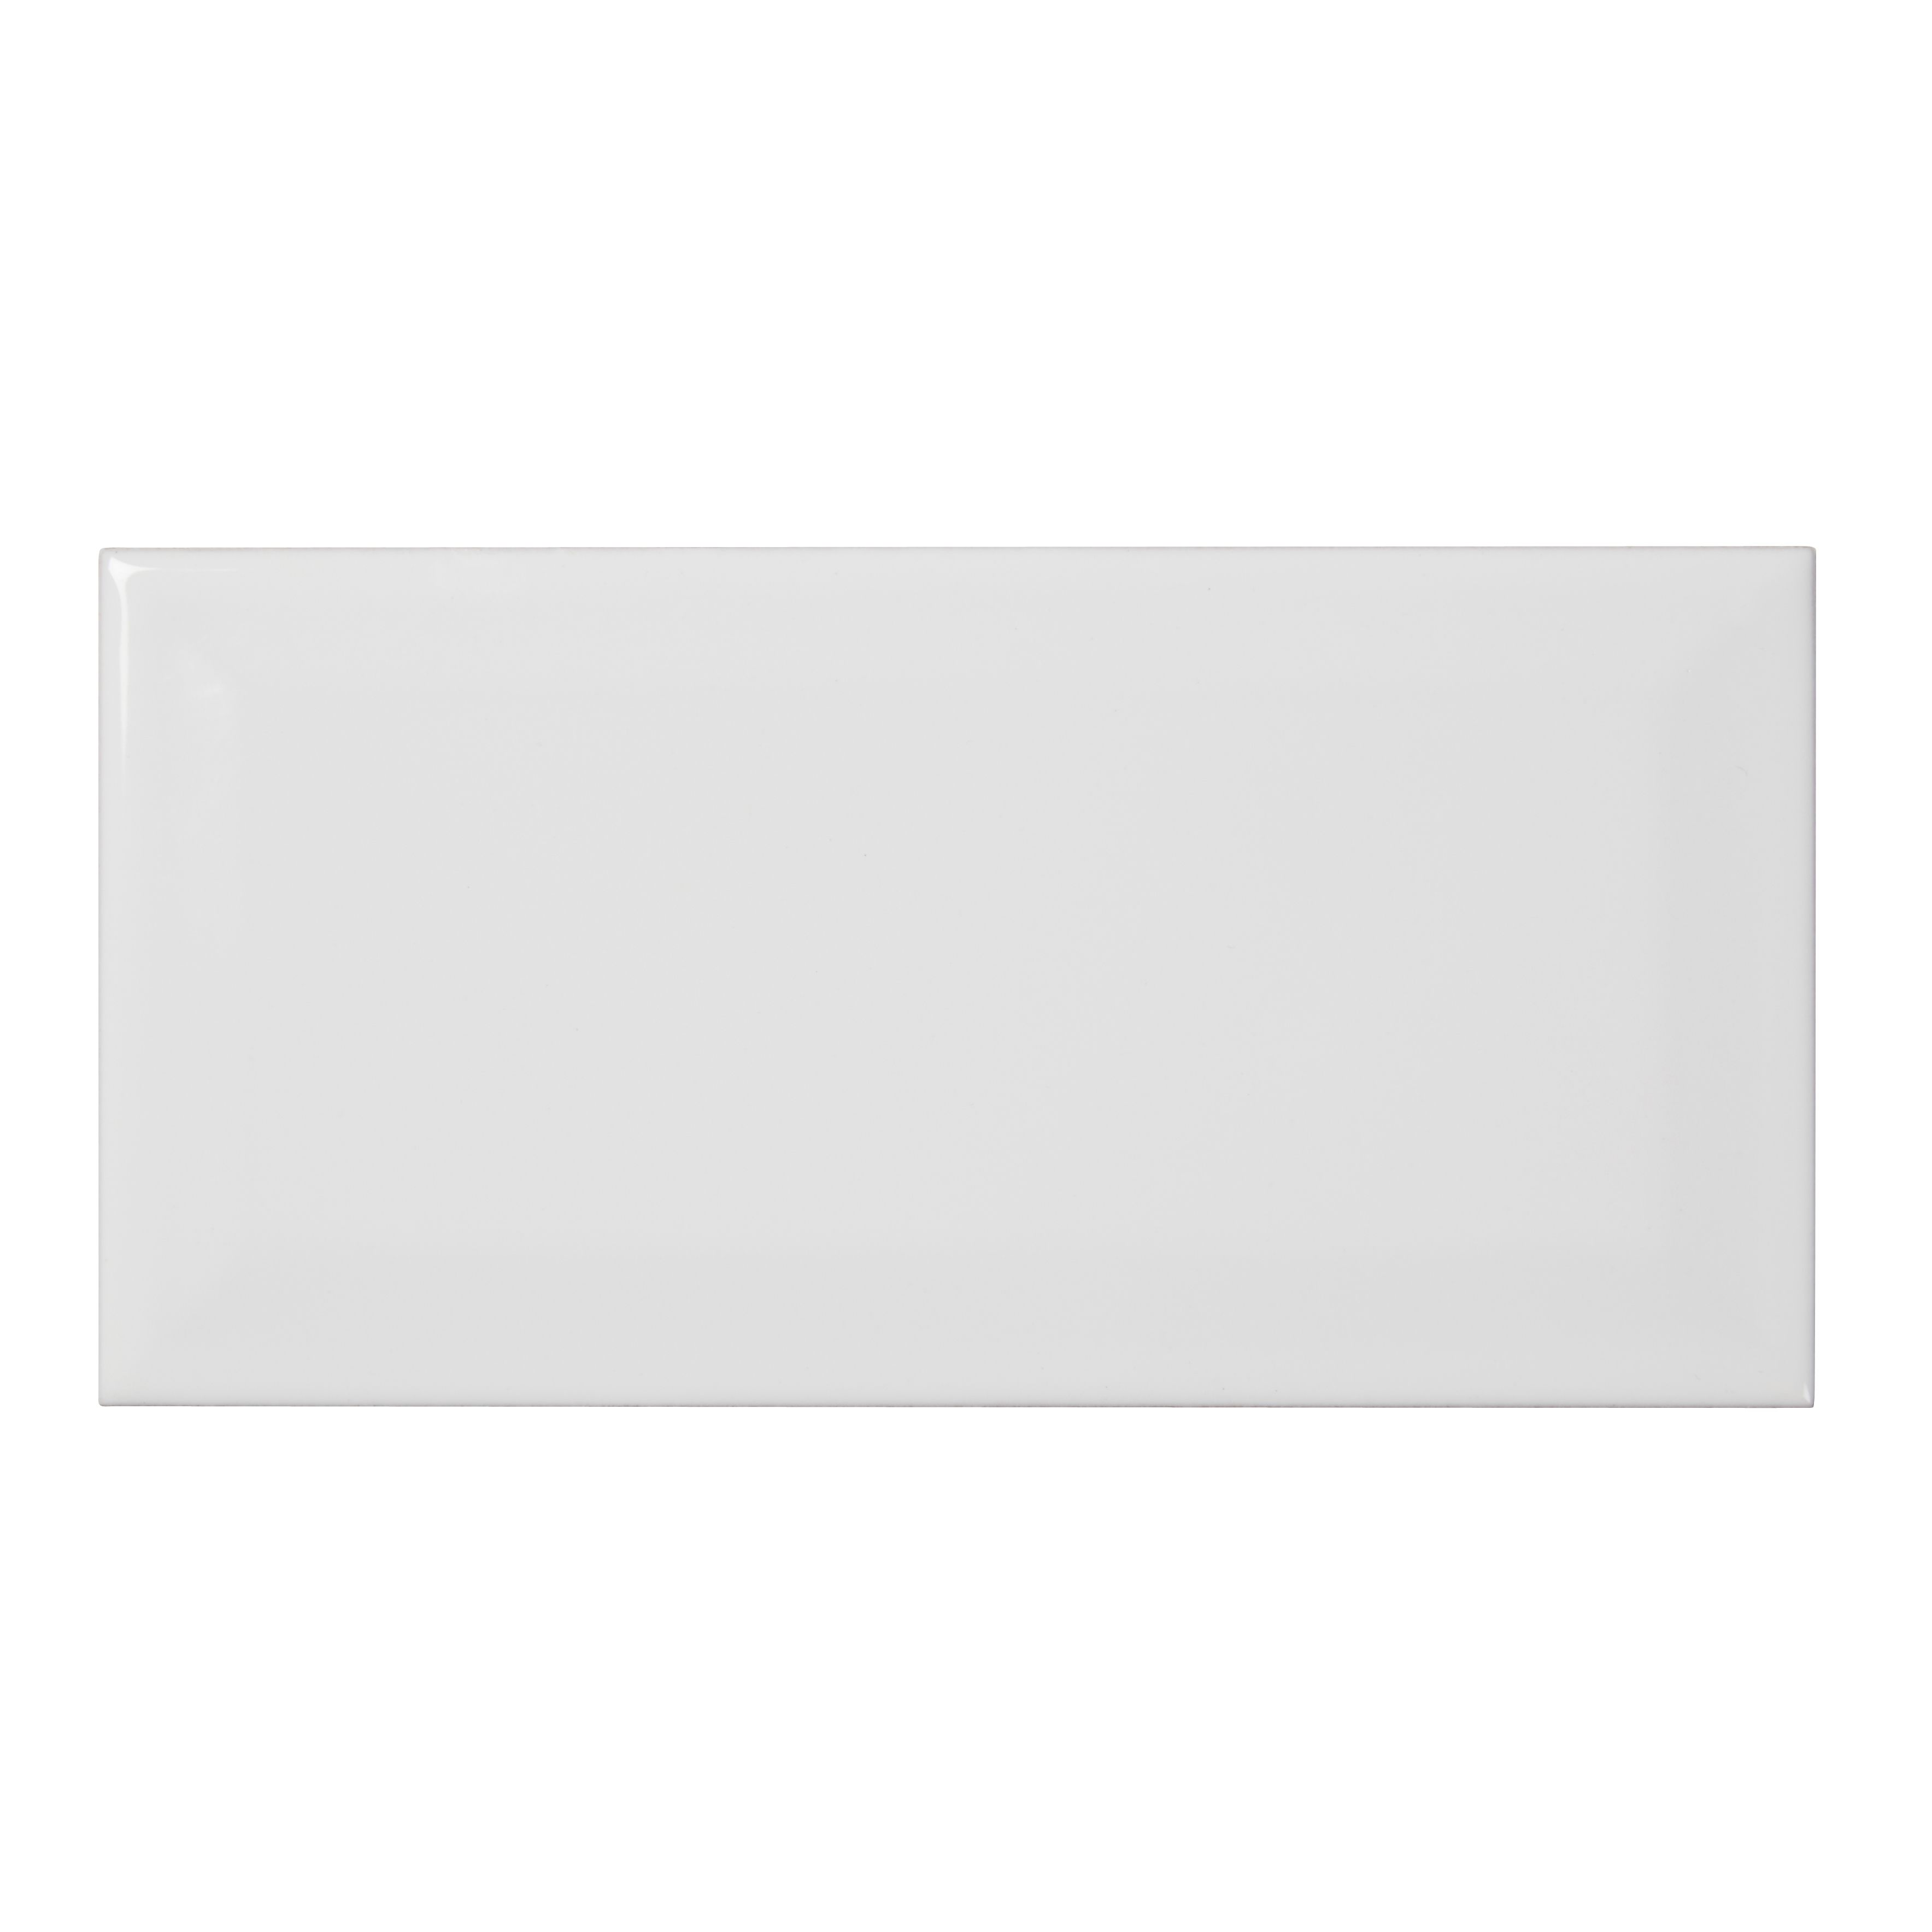 Colours Trentie White Gloss Metro Ceramic Indoor Wall Tile, Pack of 48, (L)200mm (W)100mm